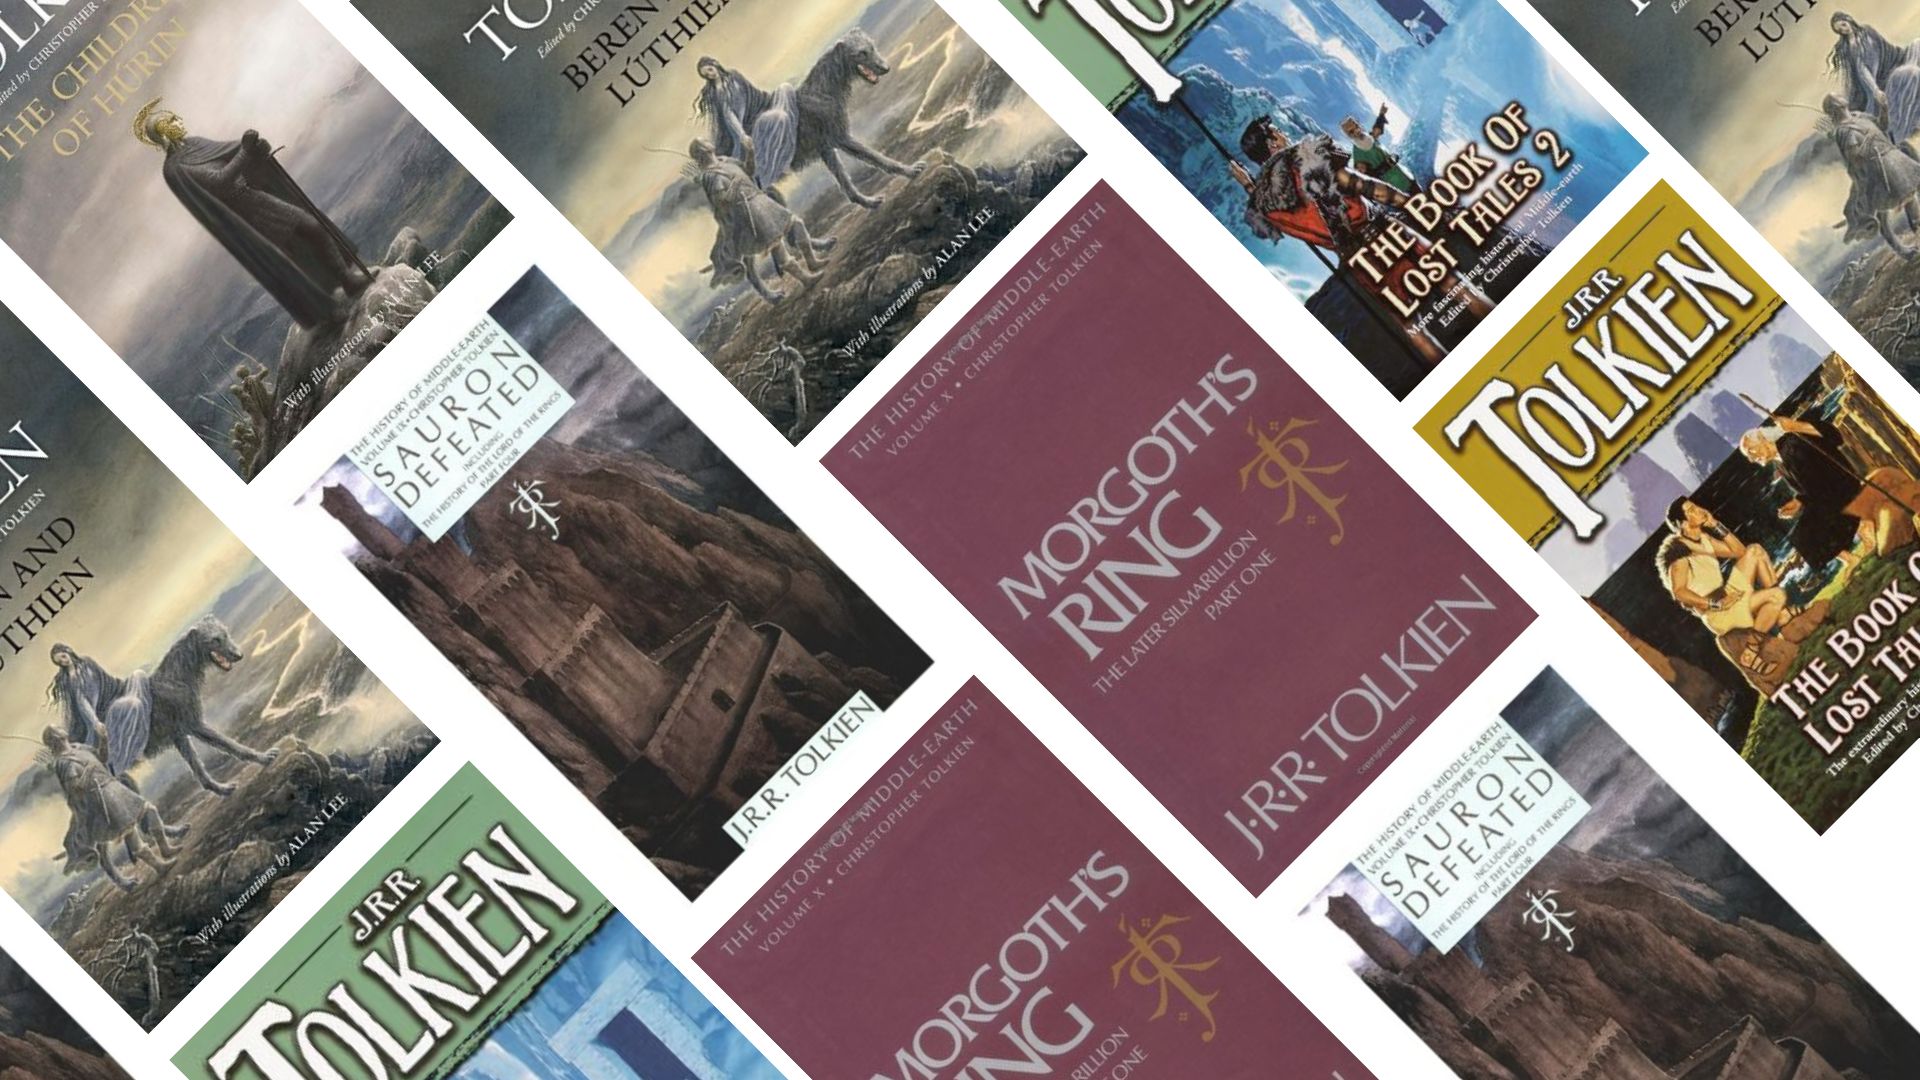 How To Read JRR Tolkien Books In Order